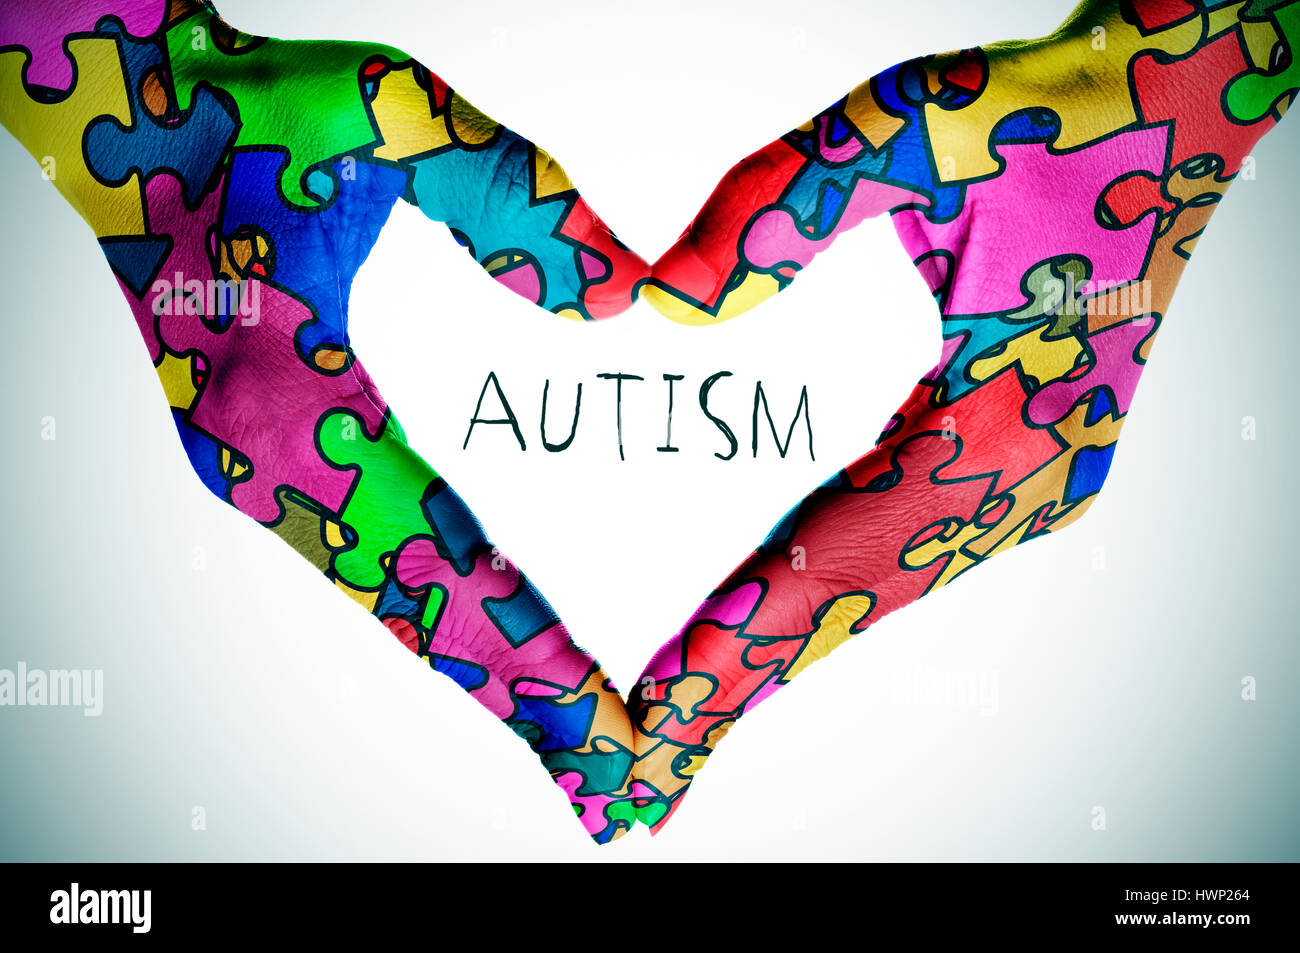 woman hands forming a heart patterned with many puzzle pieces of different colors, symbol of the autism awareness, and the text autism, with a slight  Stock Photo